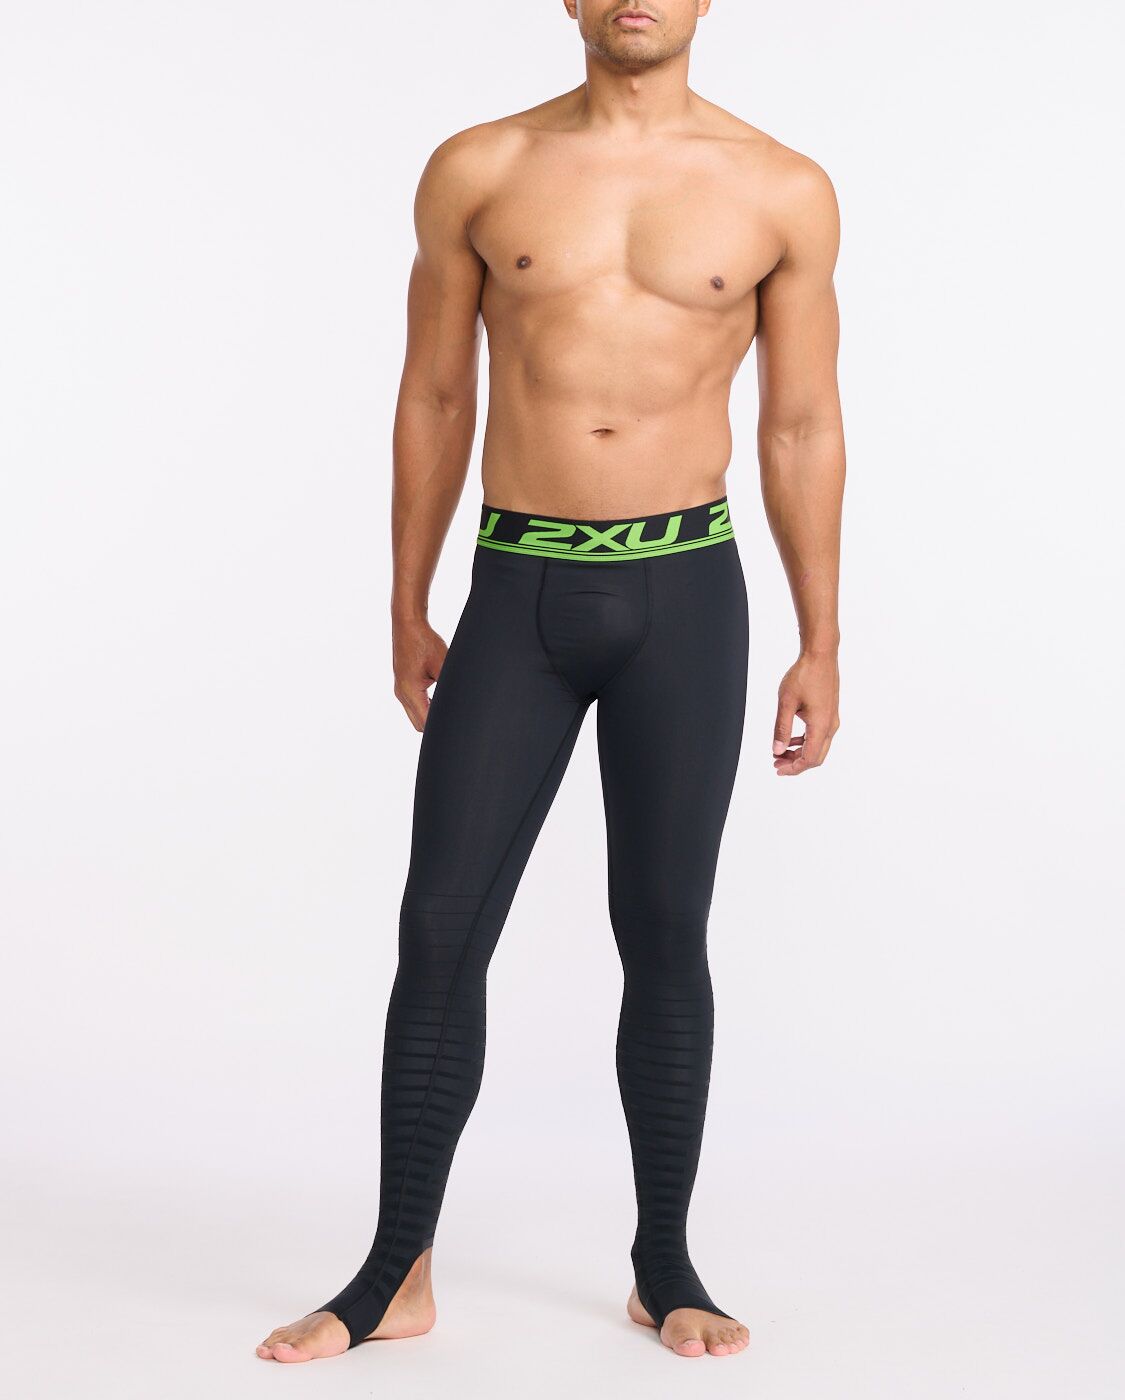 2XU Women's Refresh Recovery Compression Tights (Black/Nero, Medium): Buy  Online at Best Price in Egypt - Souq is now